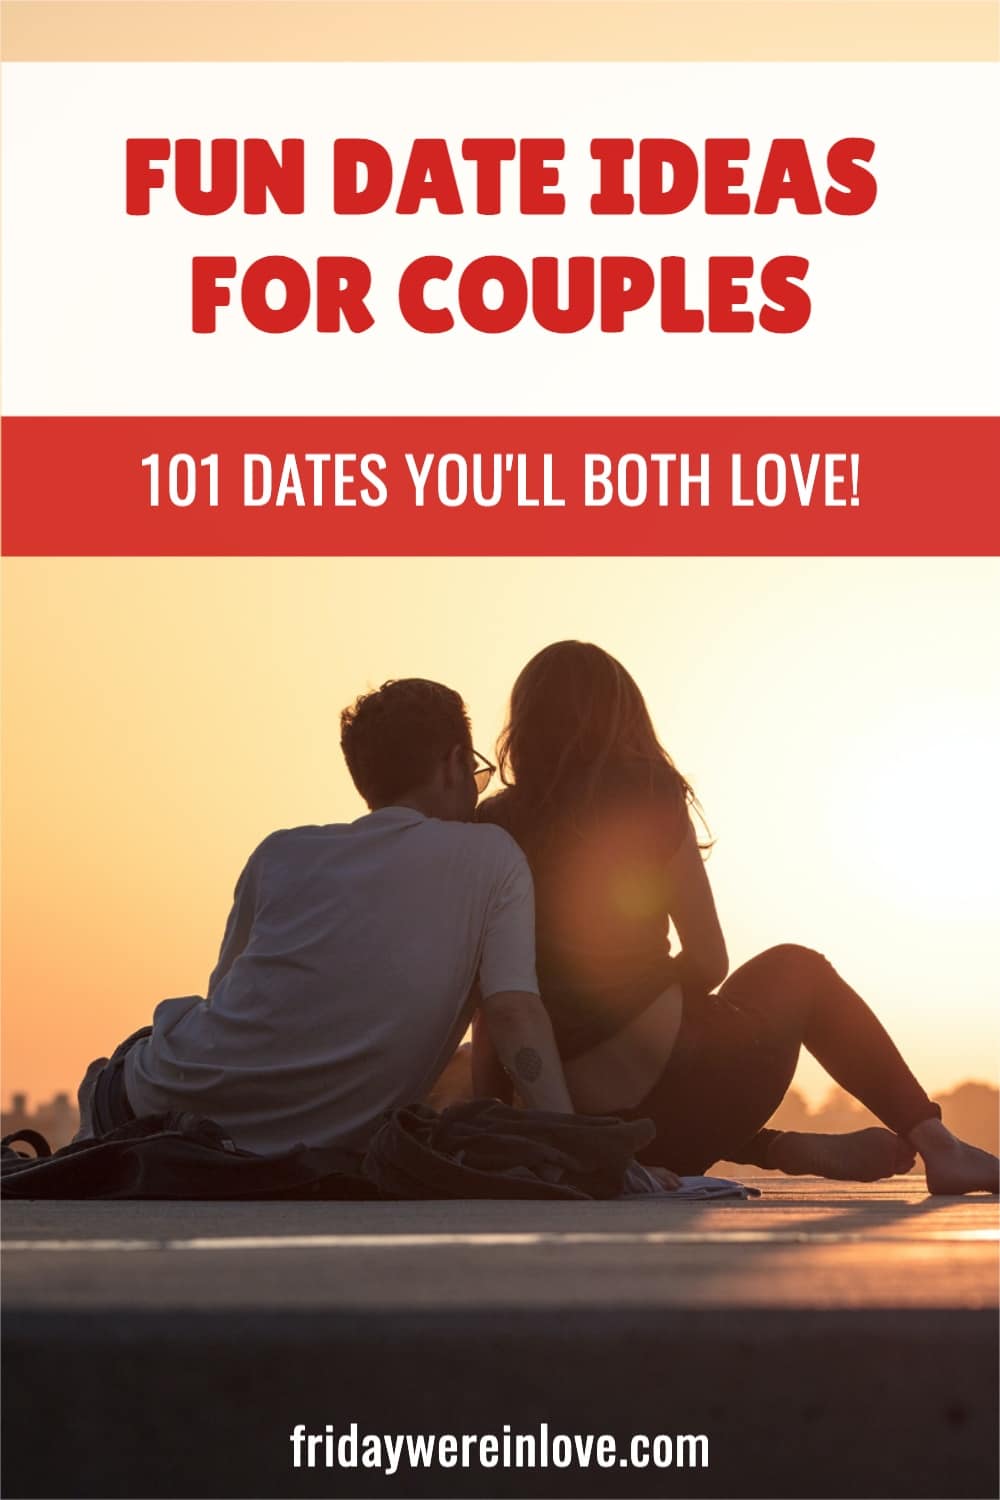 101 Date Ideas- Creative and Fun Date Ideas- Friday We're in Love